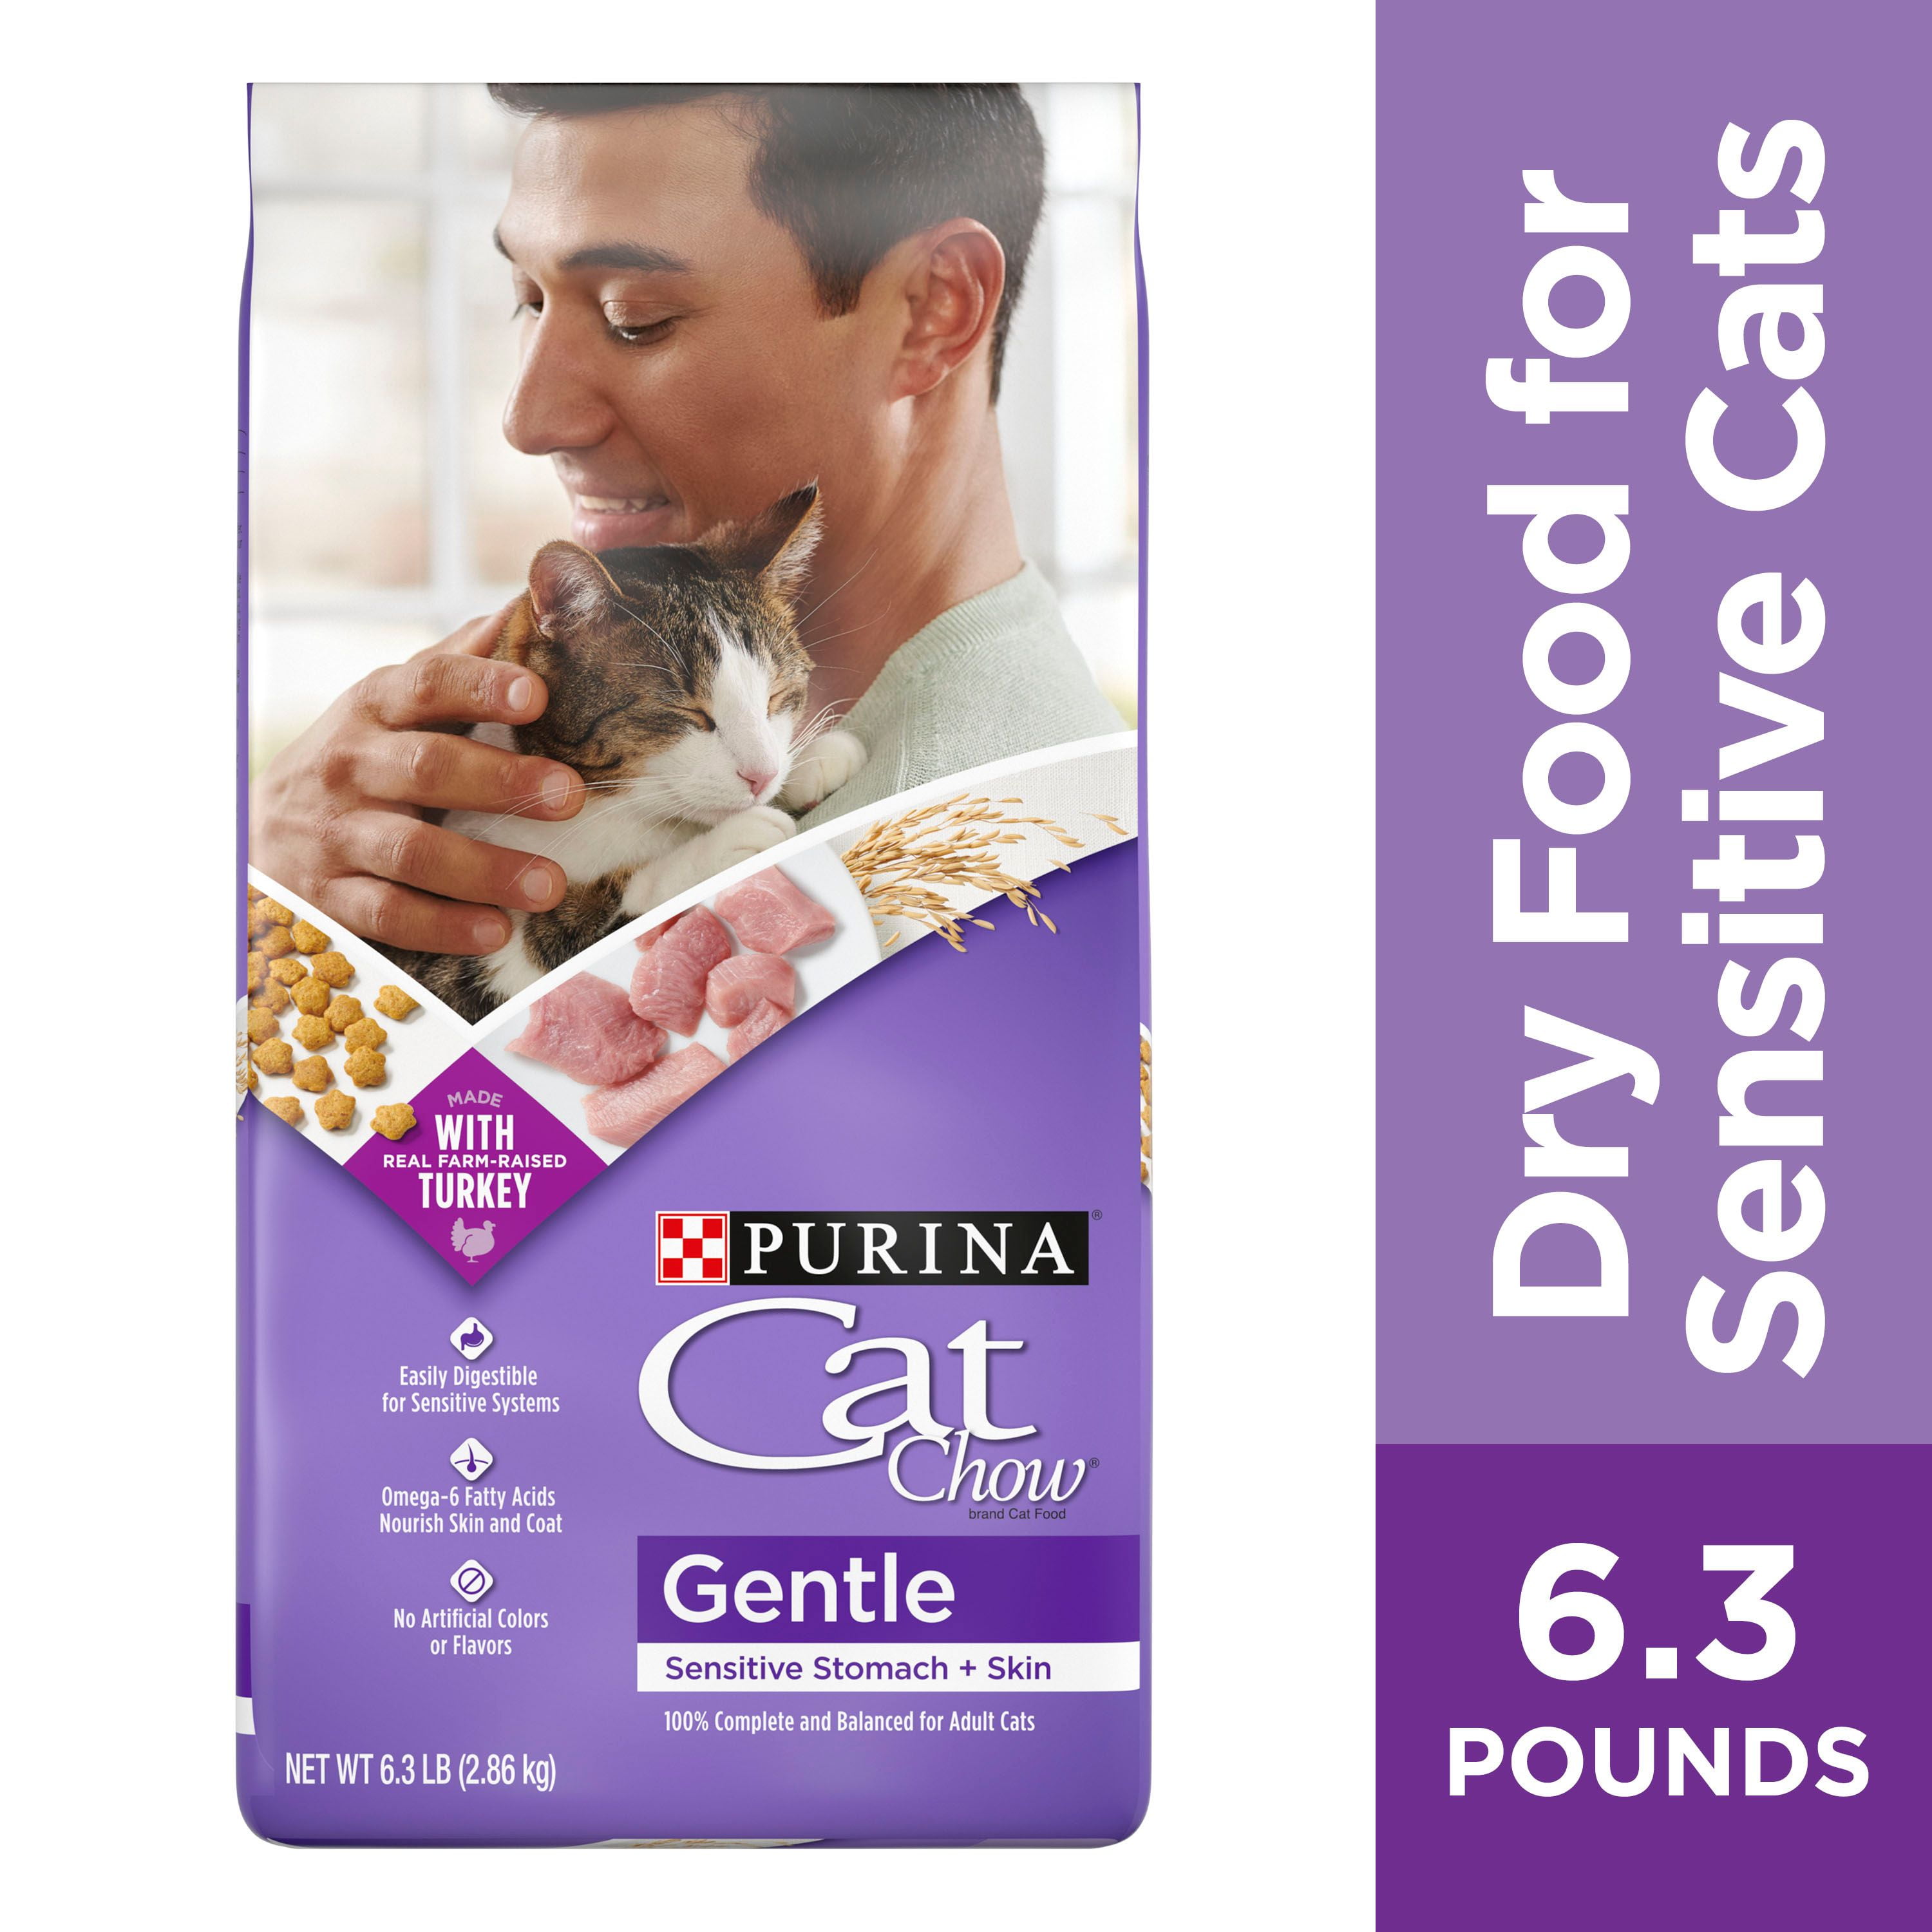 Purina Cat Chow Gentle Dry Cat Food, Sensitive Stomach + Skin, 6.3 lb